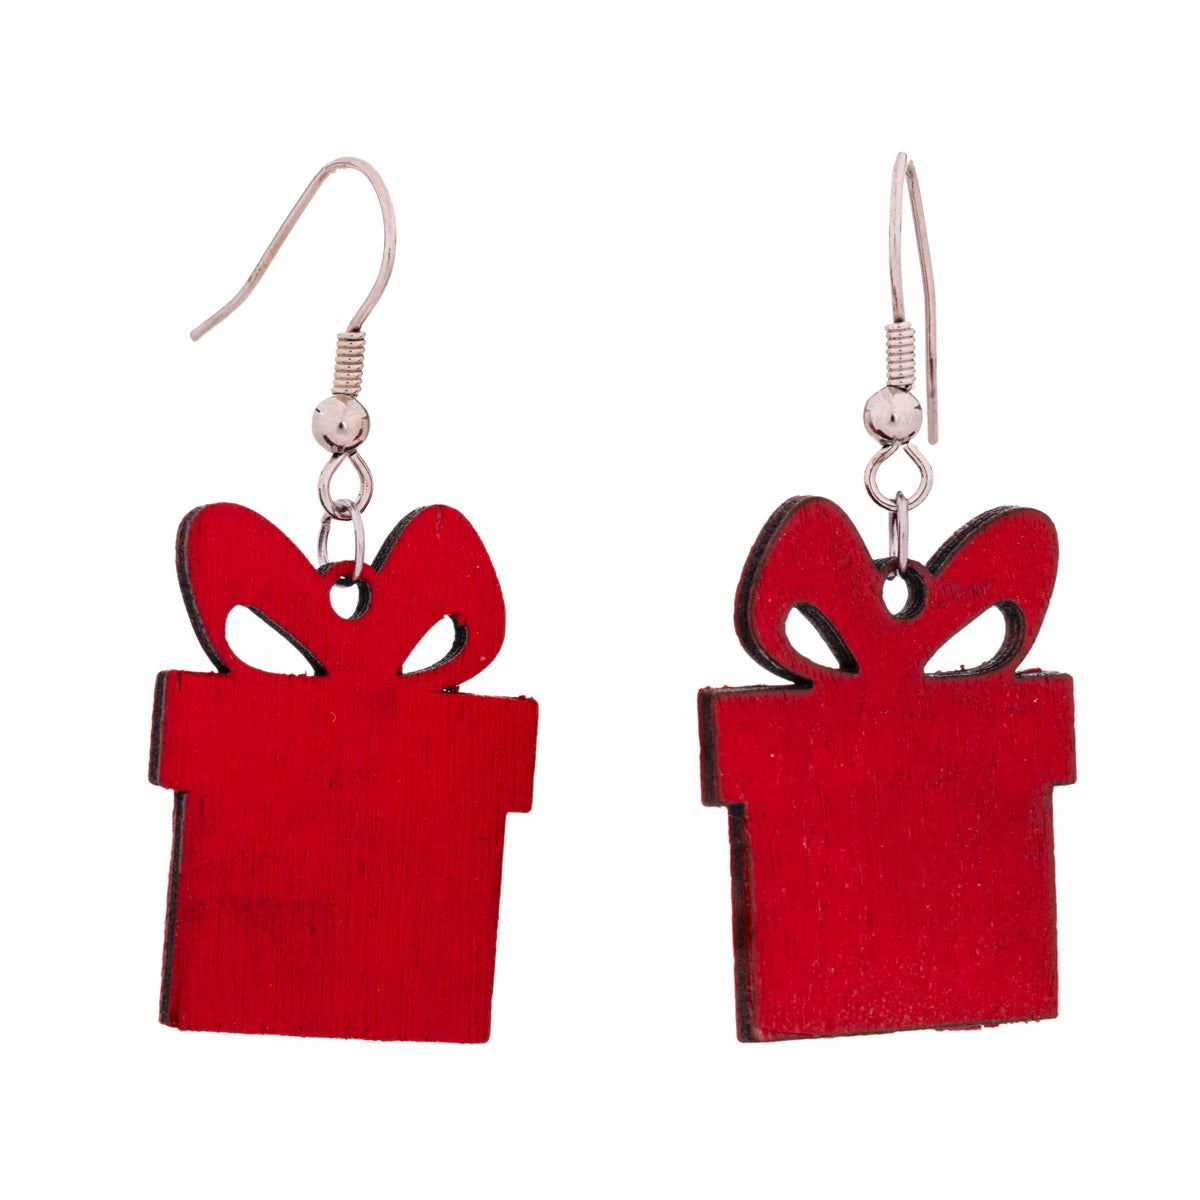 Wood Christmas Gift Earrings - Made in Finland (Steel 316L)